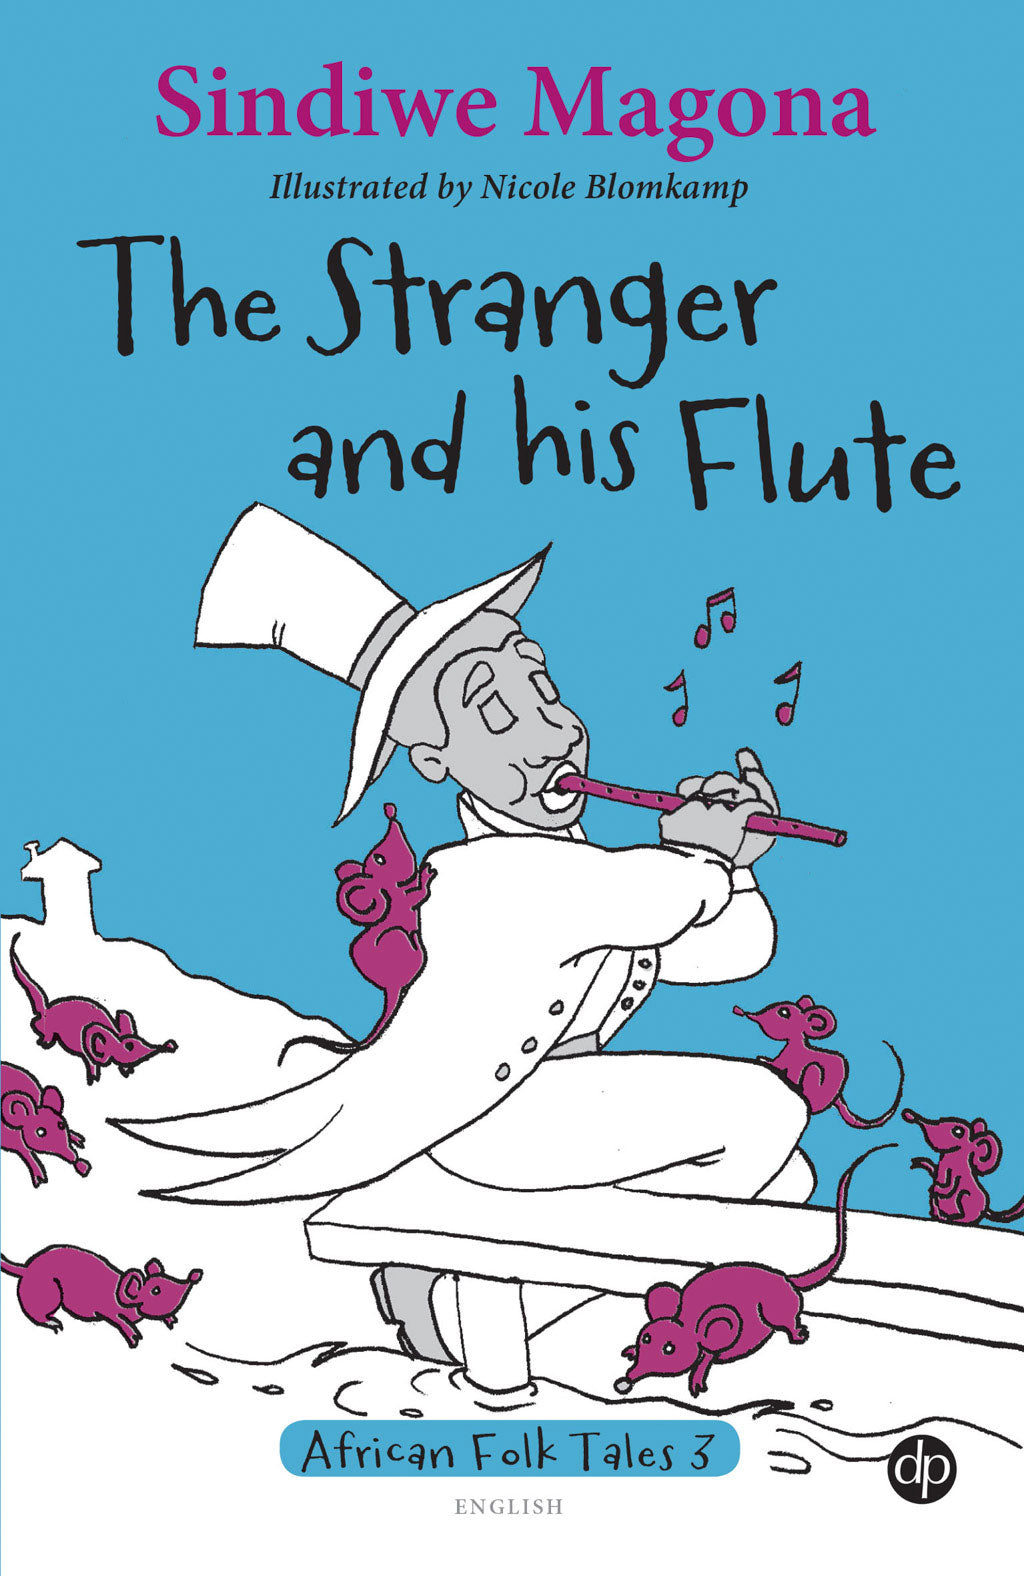 THE STRANGER AND HIS FLUTE - Folk Tale 3